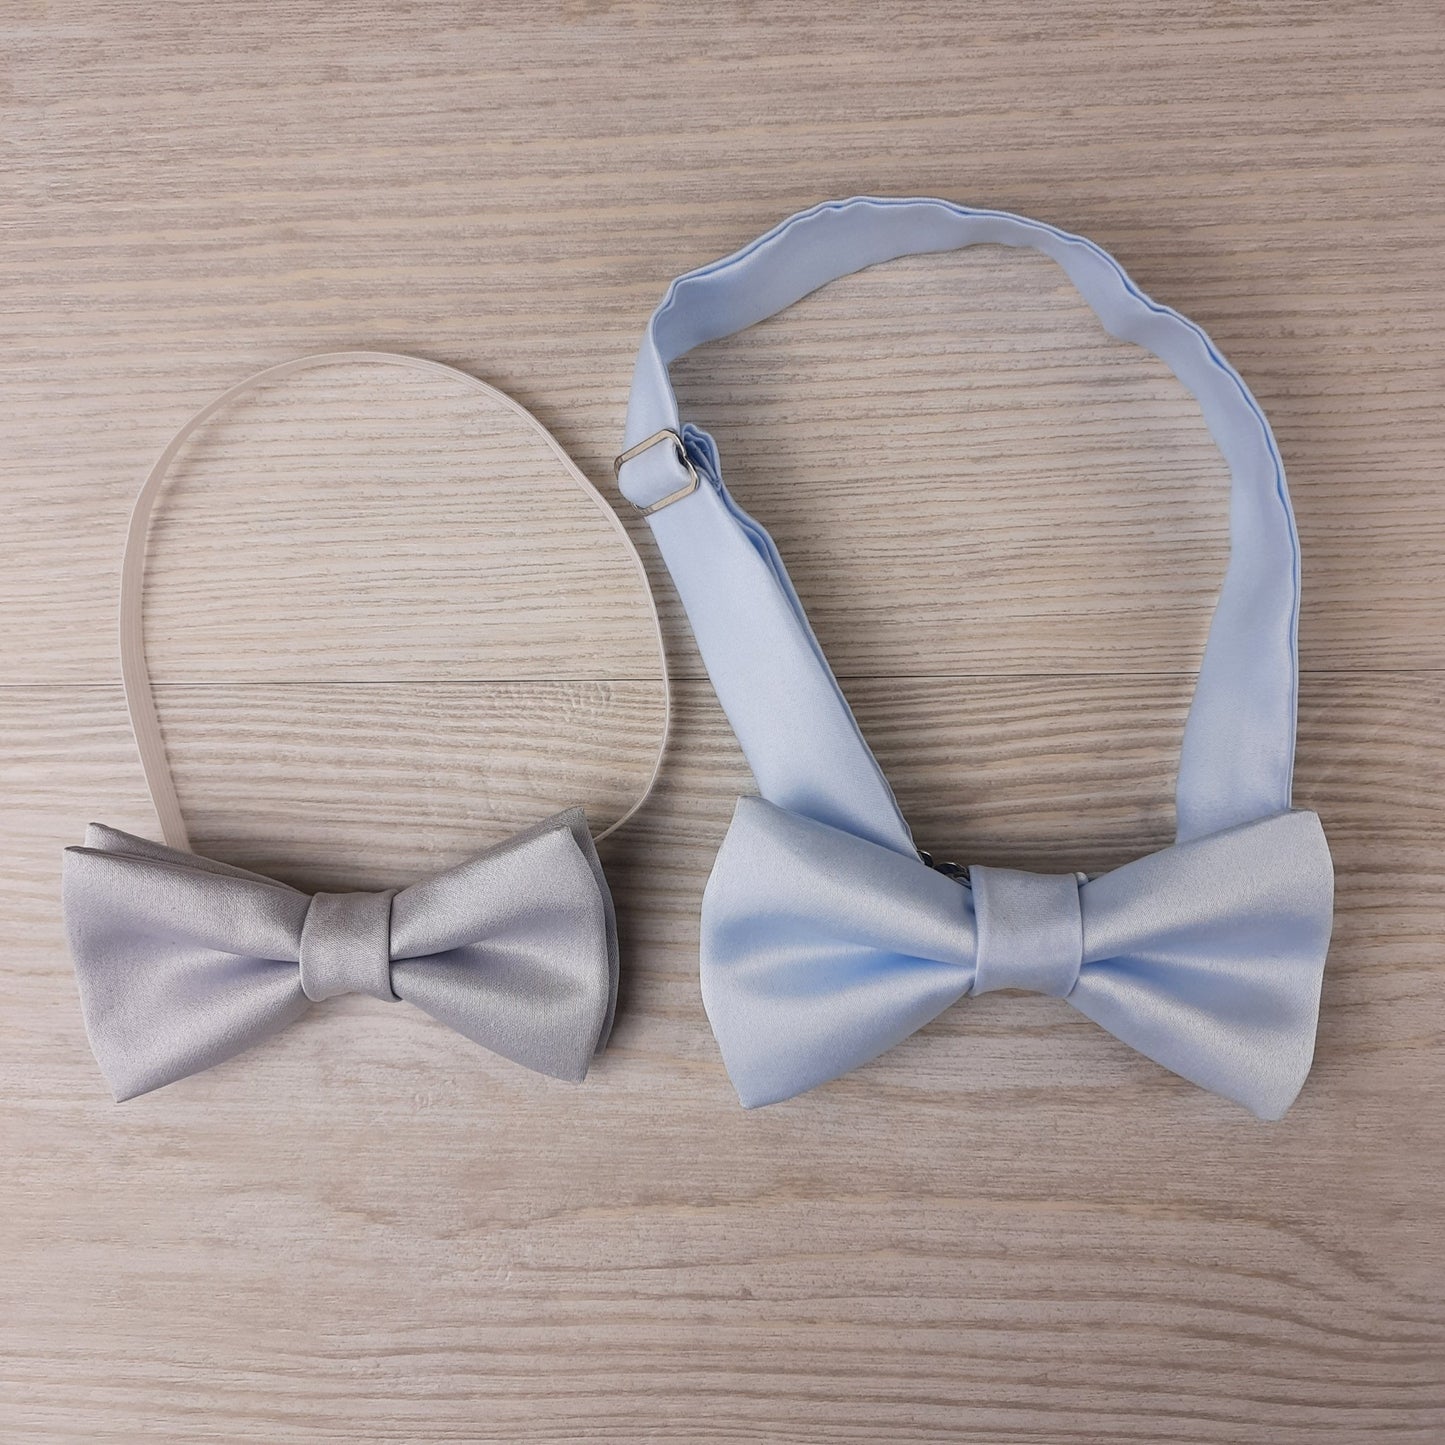 Chantilly Cream Boys Bow Ties - Childrenswear - Neckstrap - Swagger & Swoon